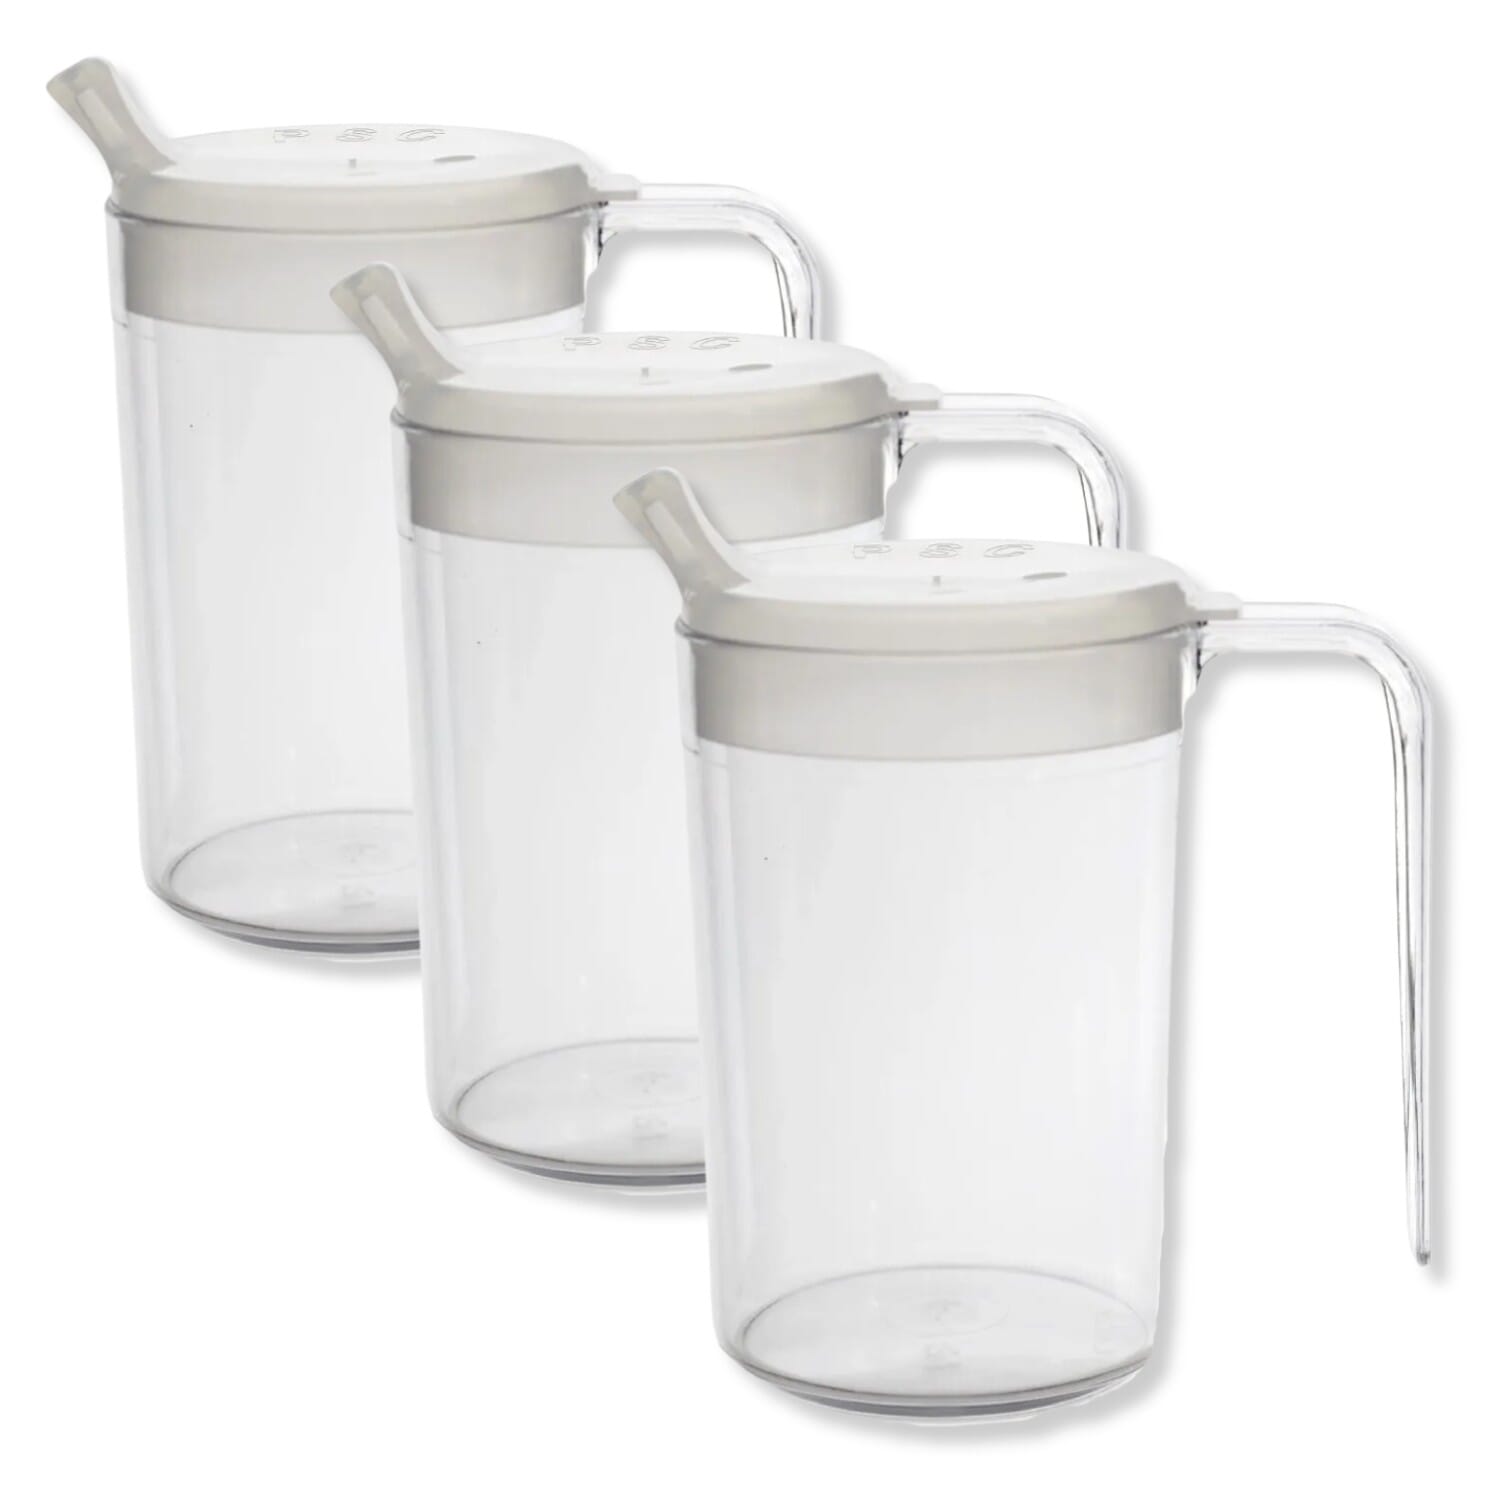 View Transparent Feeding Cup Pack of 3 information